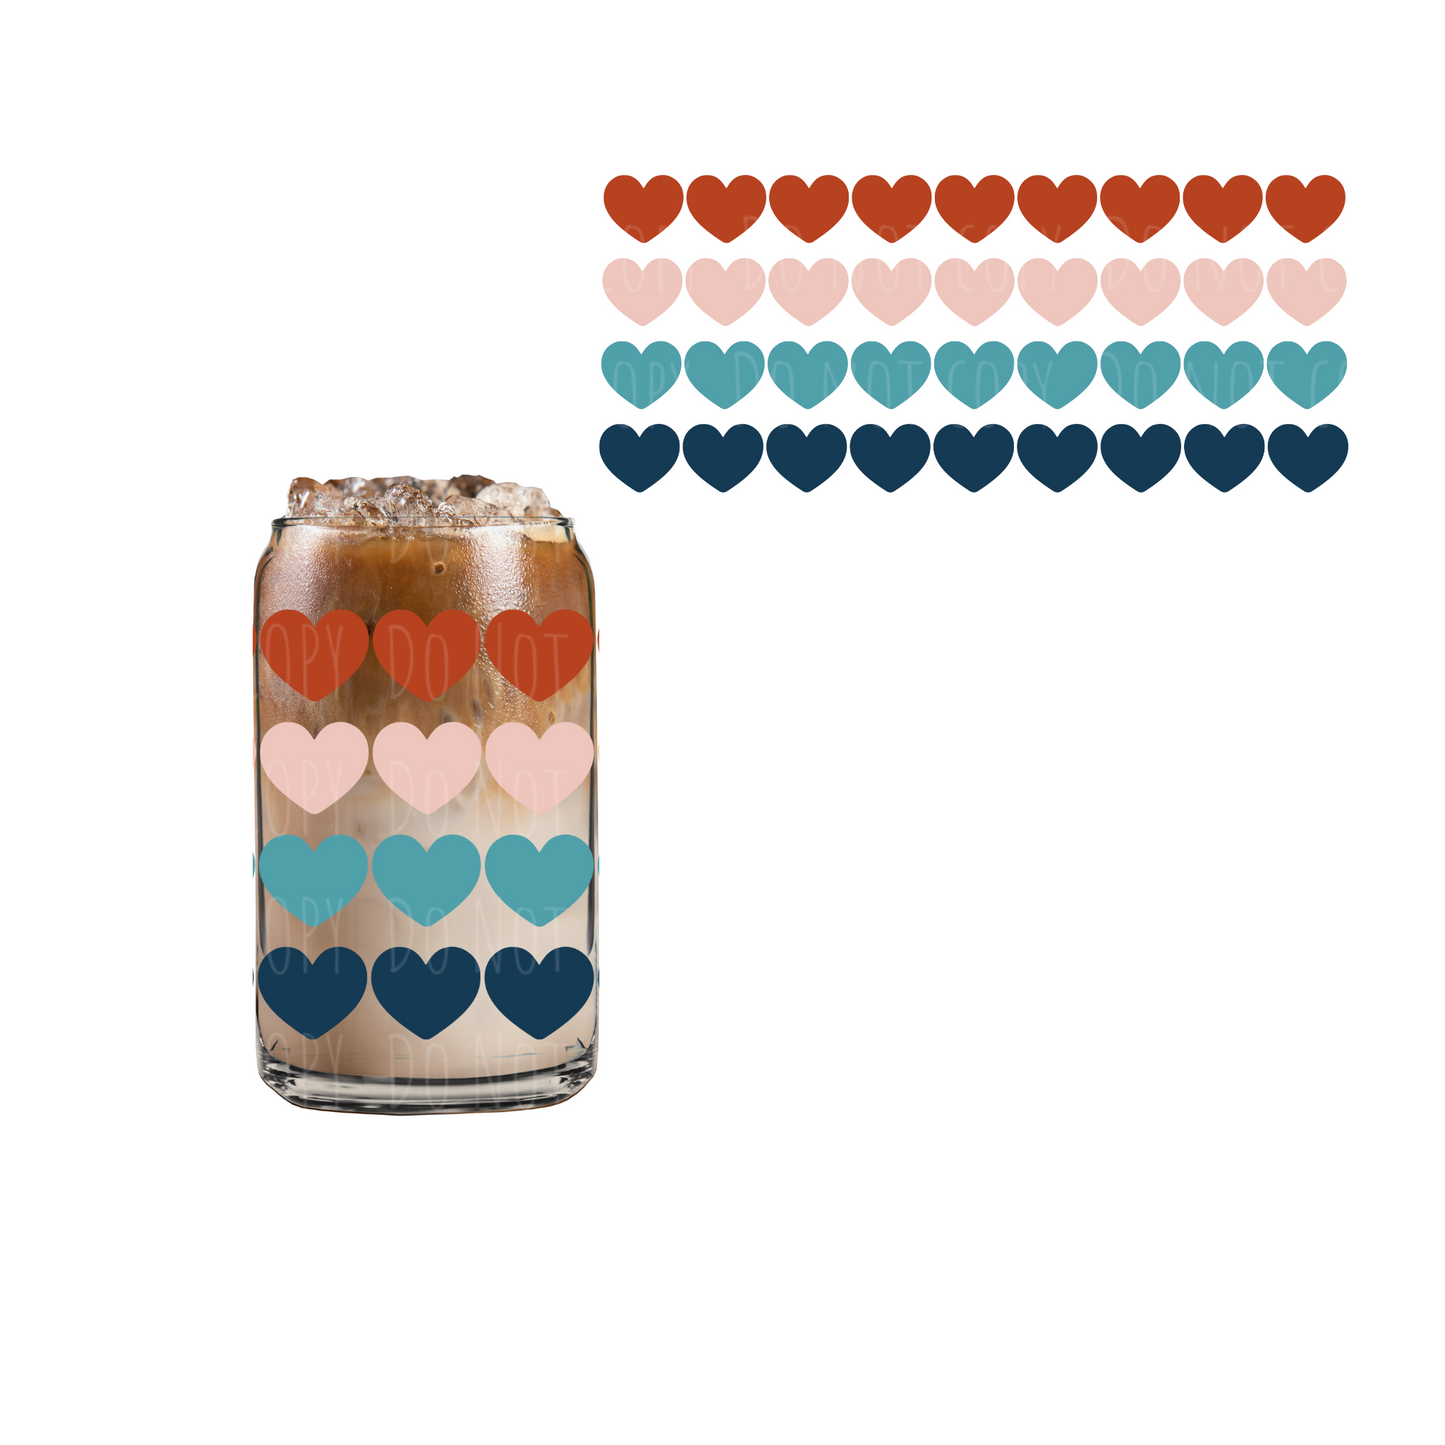 All Hearts UVDTF cup wrap